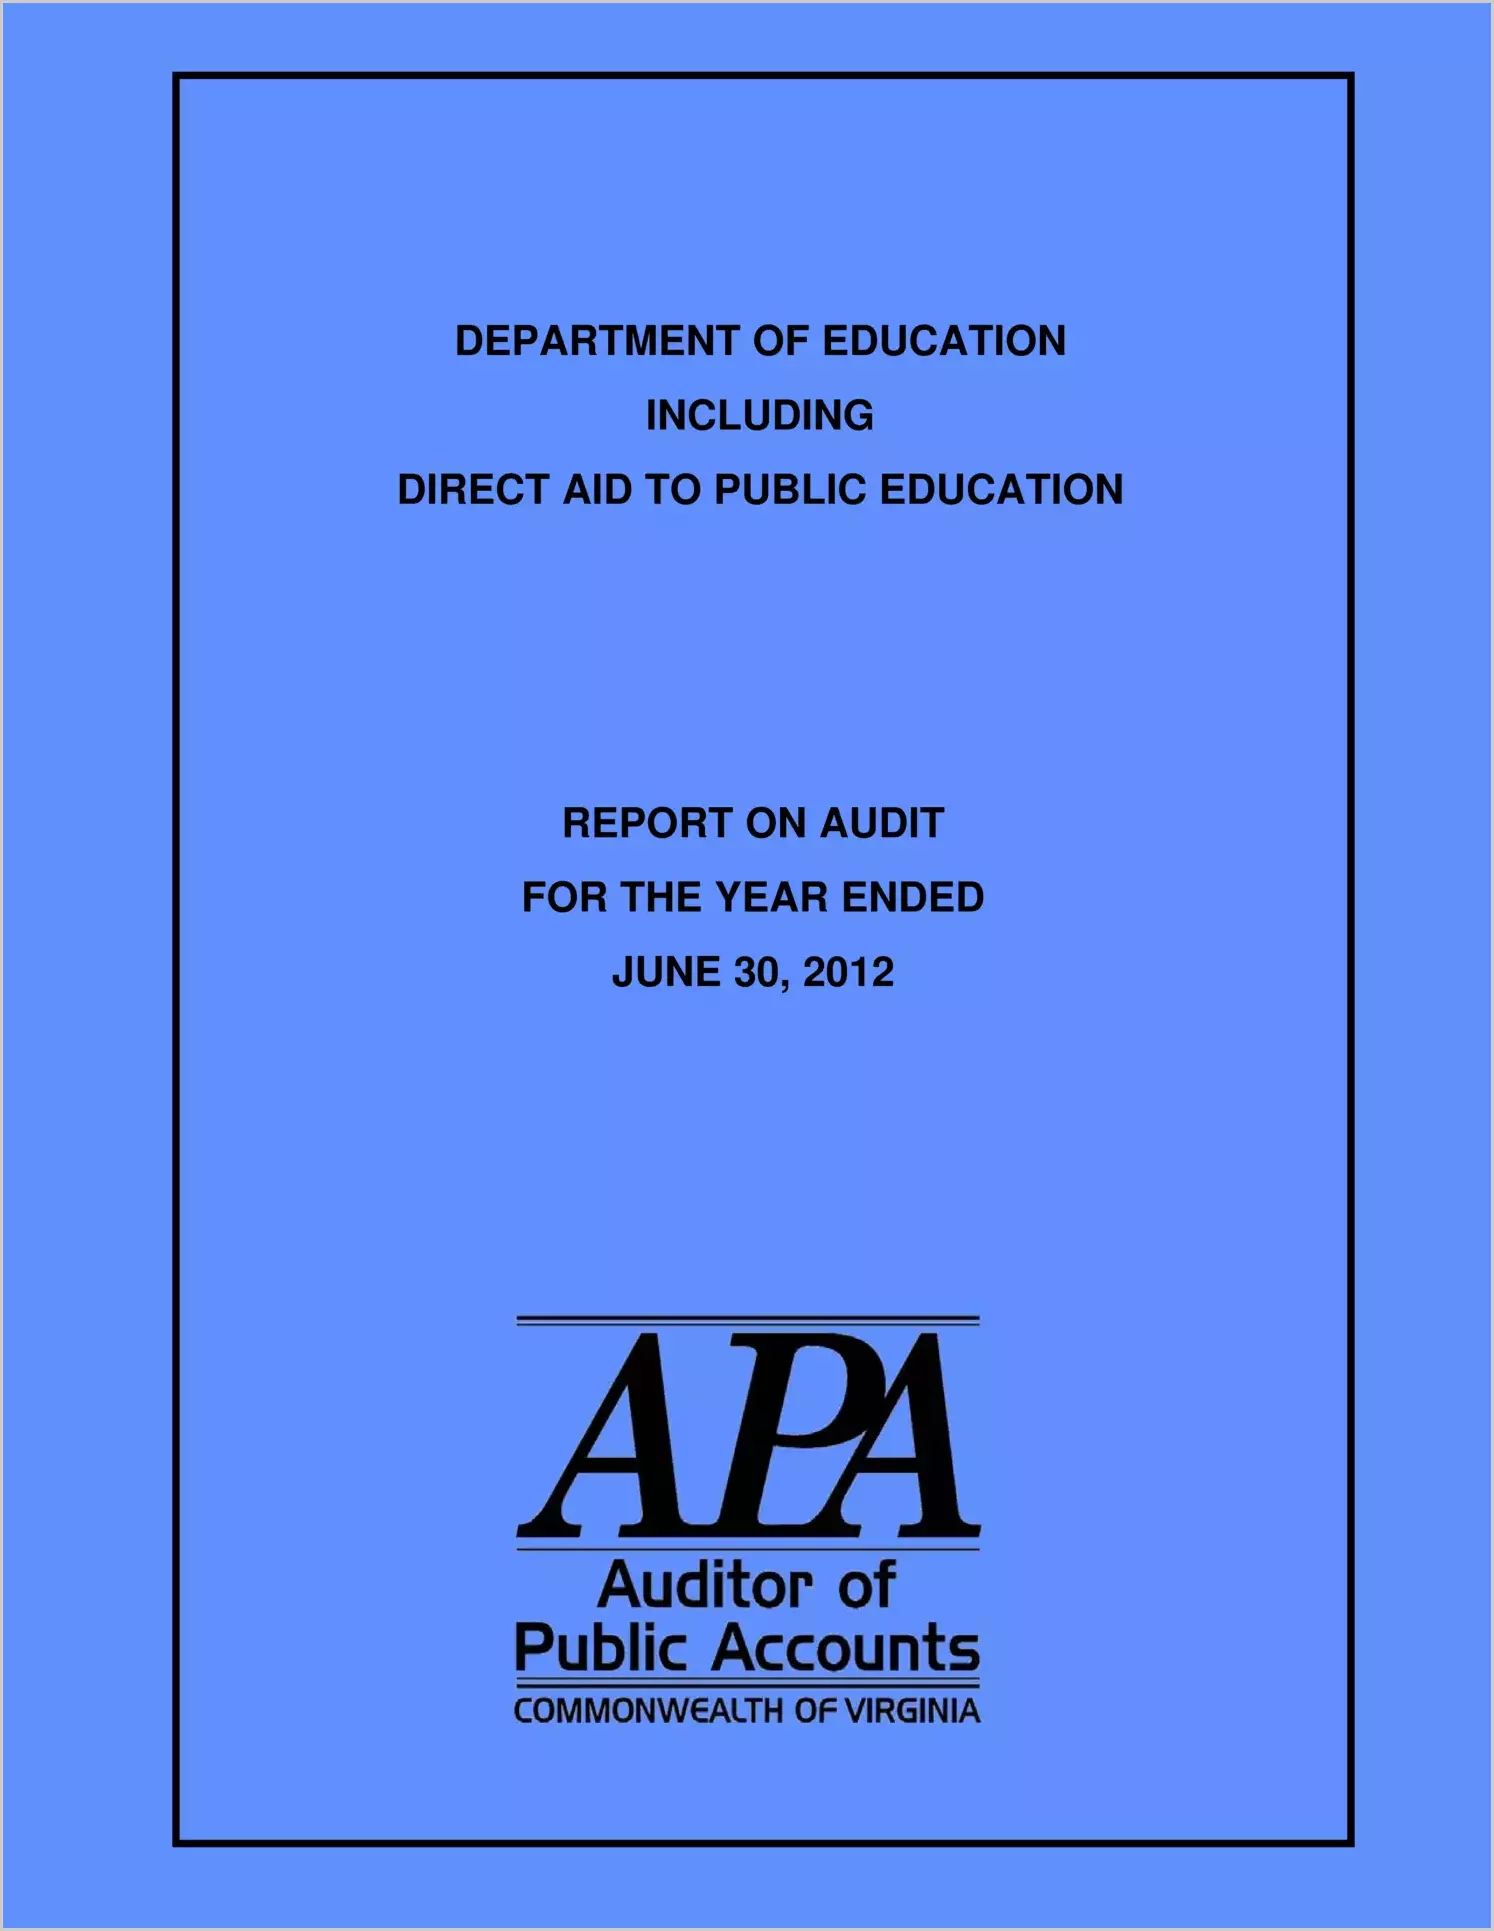 Department of Education Including Direct Aid to Public Education for the year ended June 30, 2012